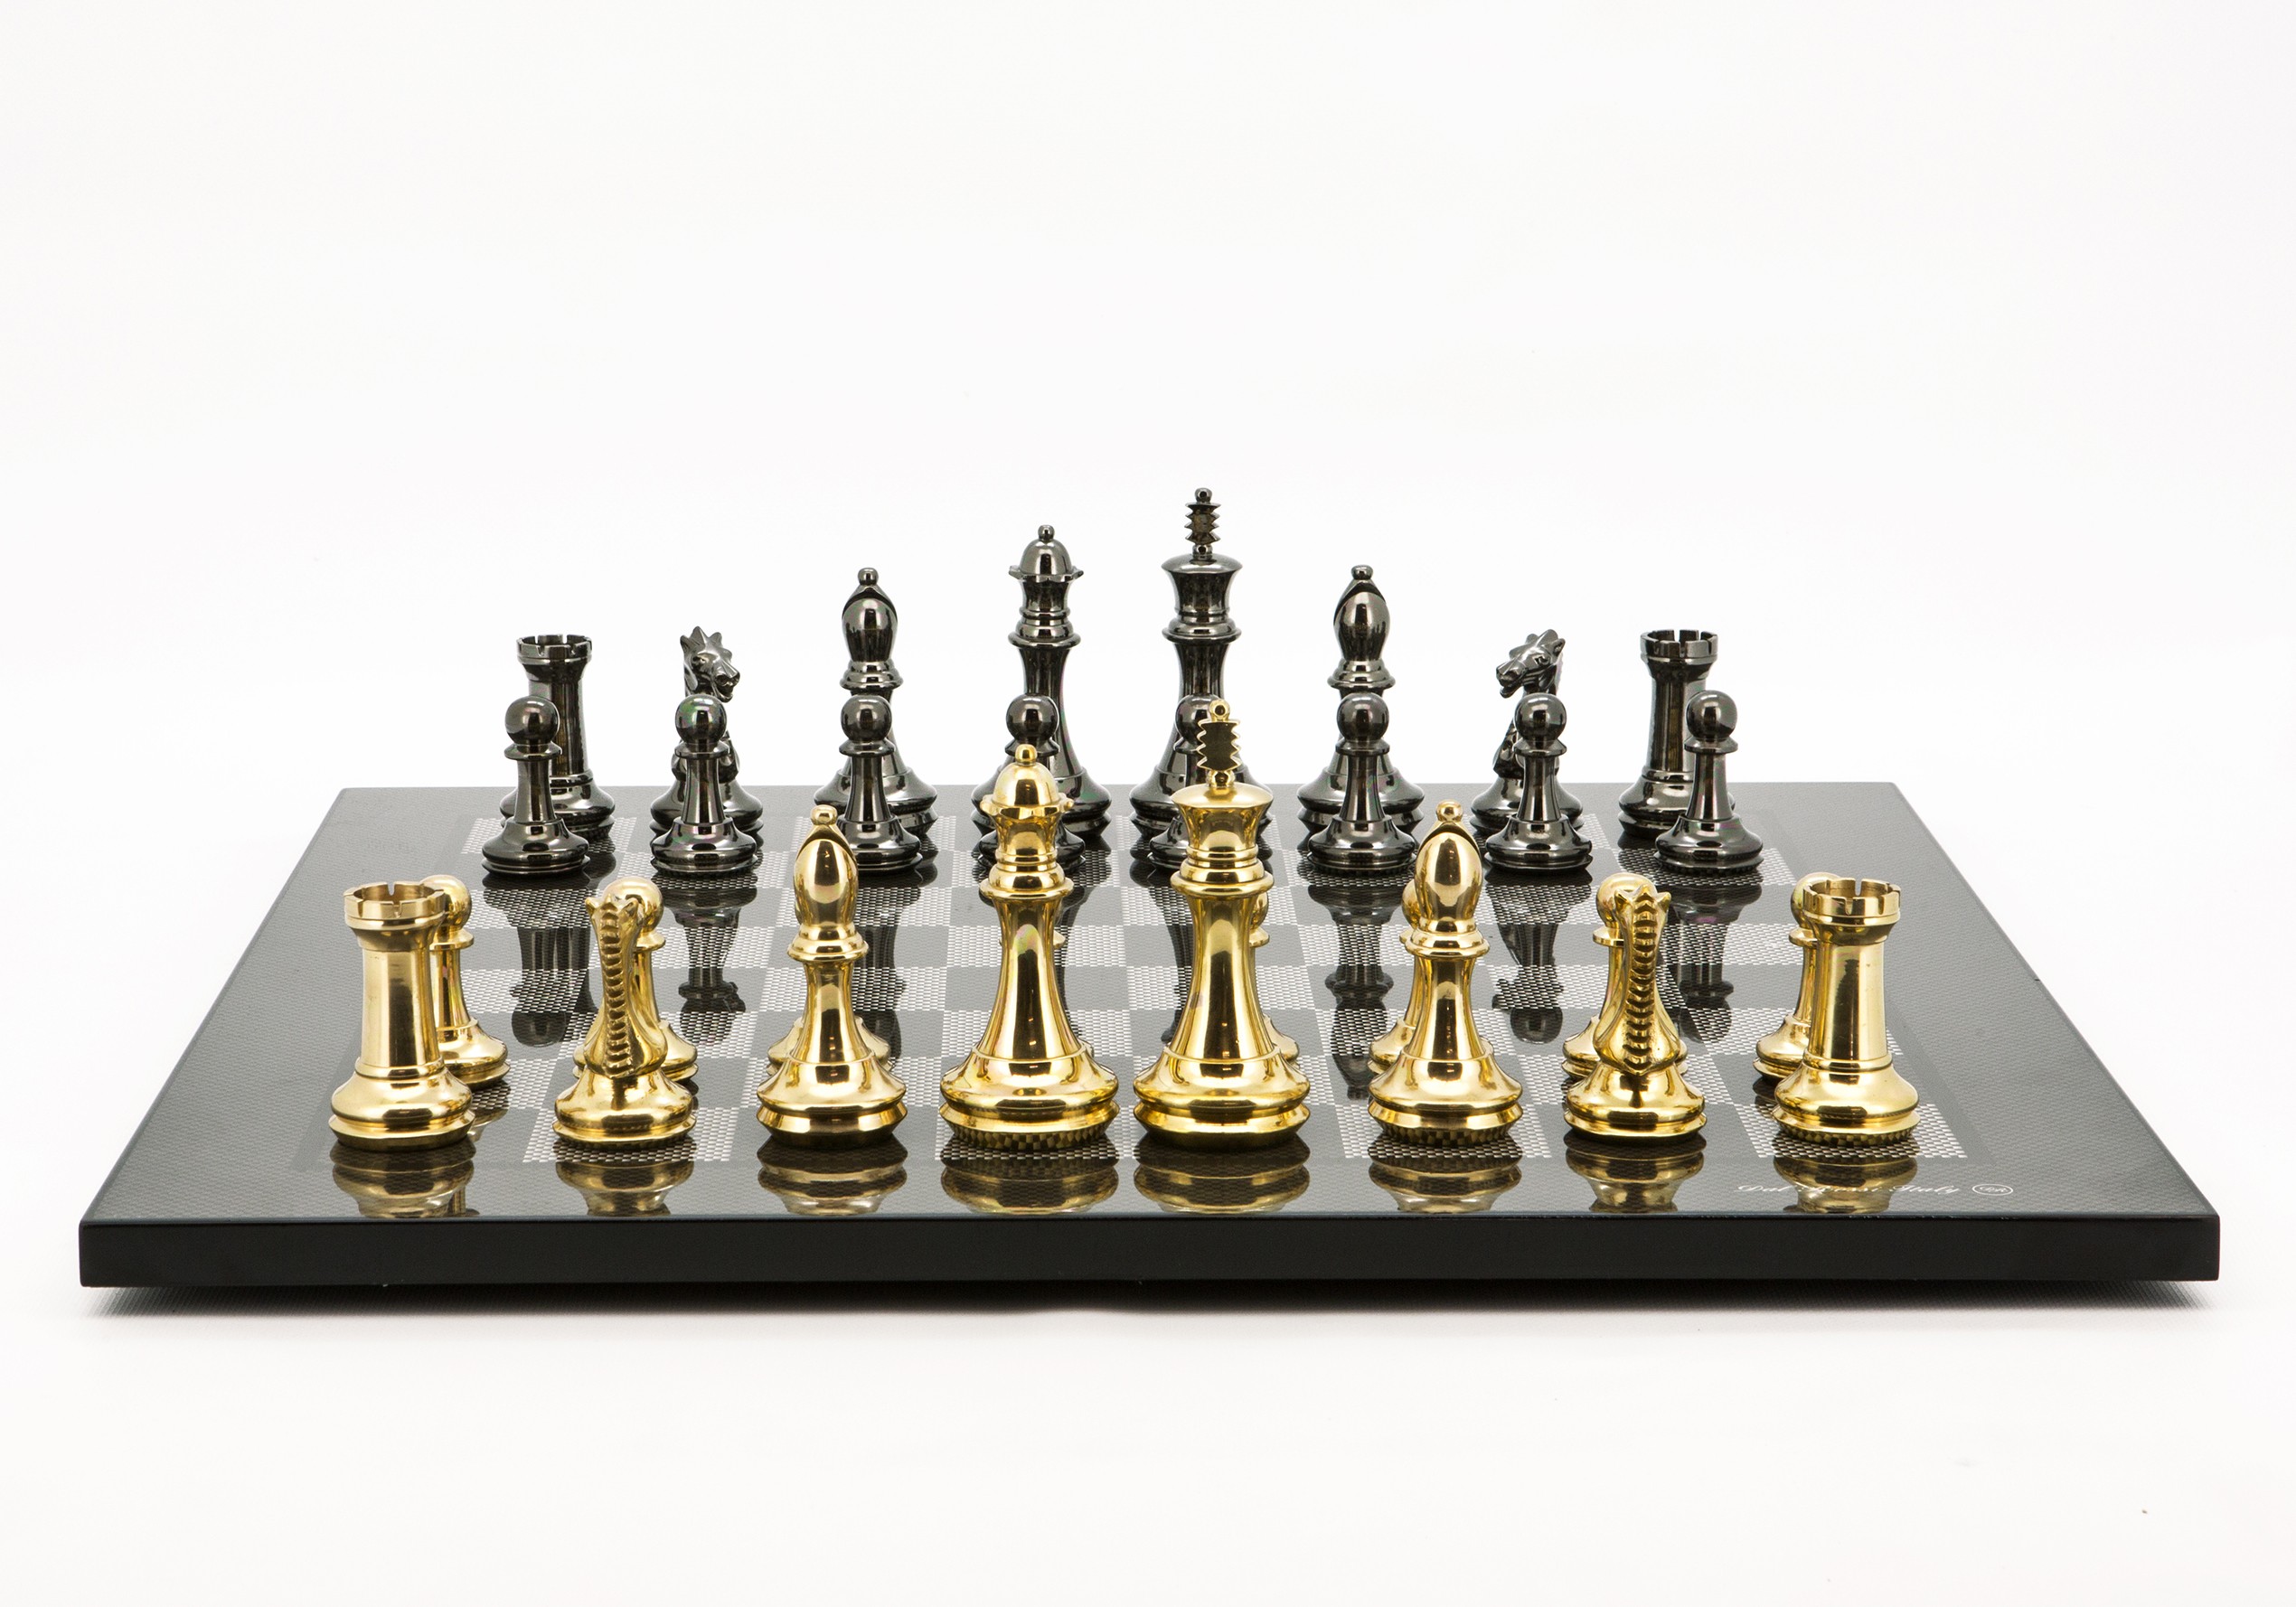 Dal Rossi Italy Chess Set Carbon Fibre Board 50cm, With Very Heavy Brass Staunton Gold and Silver chessmen 110mm